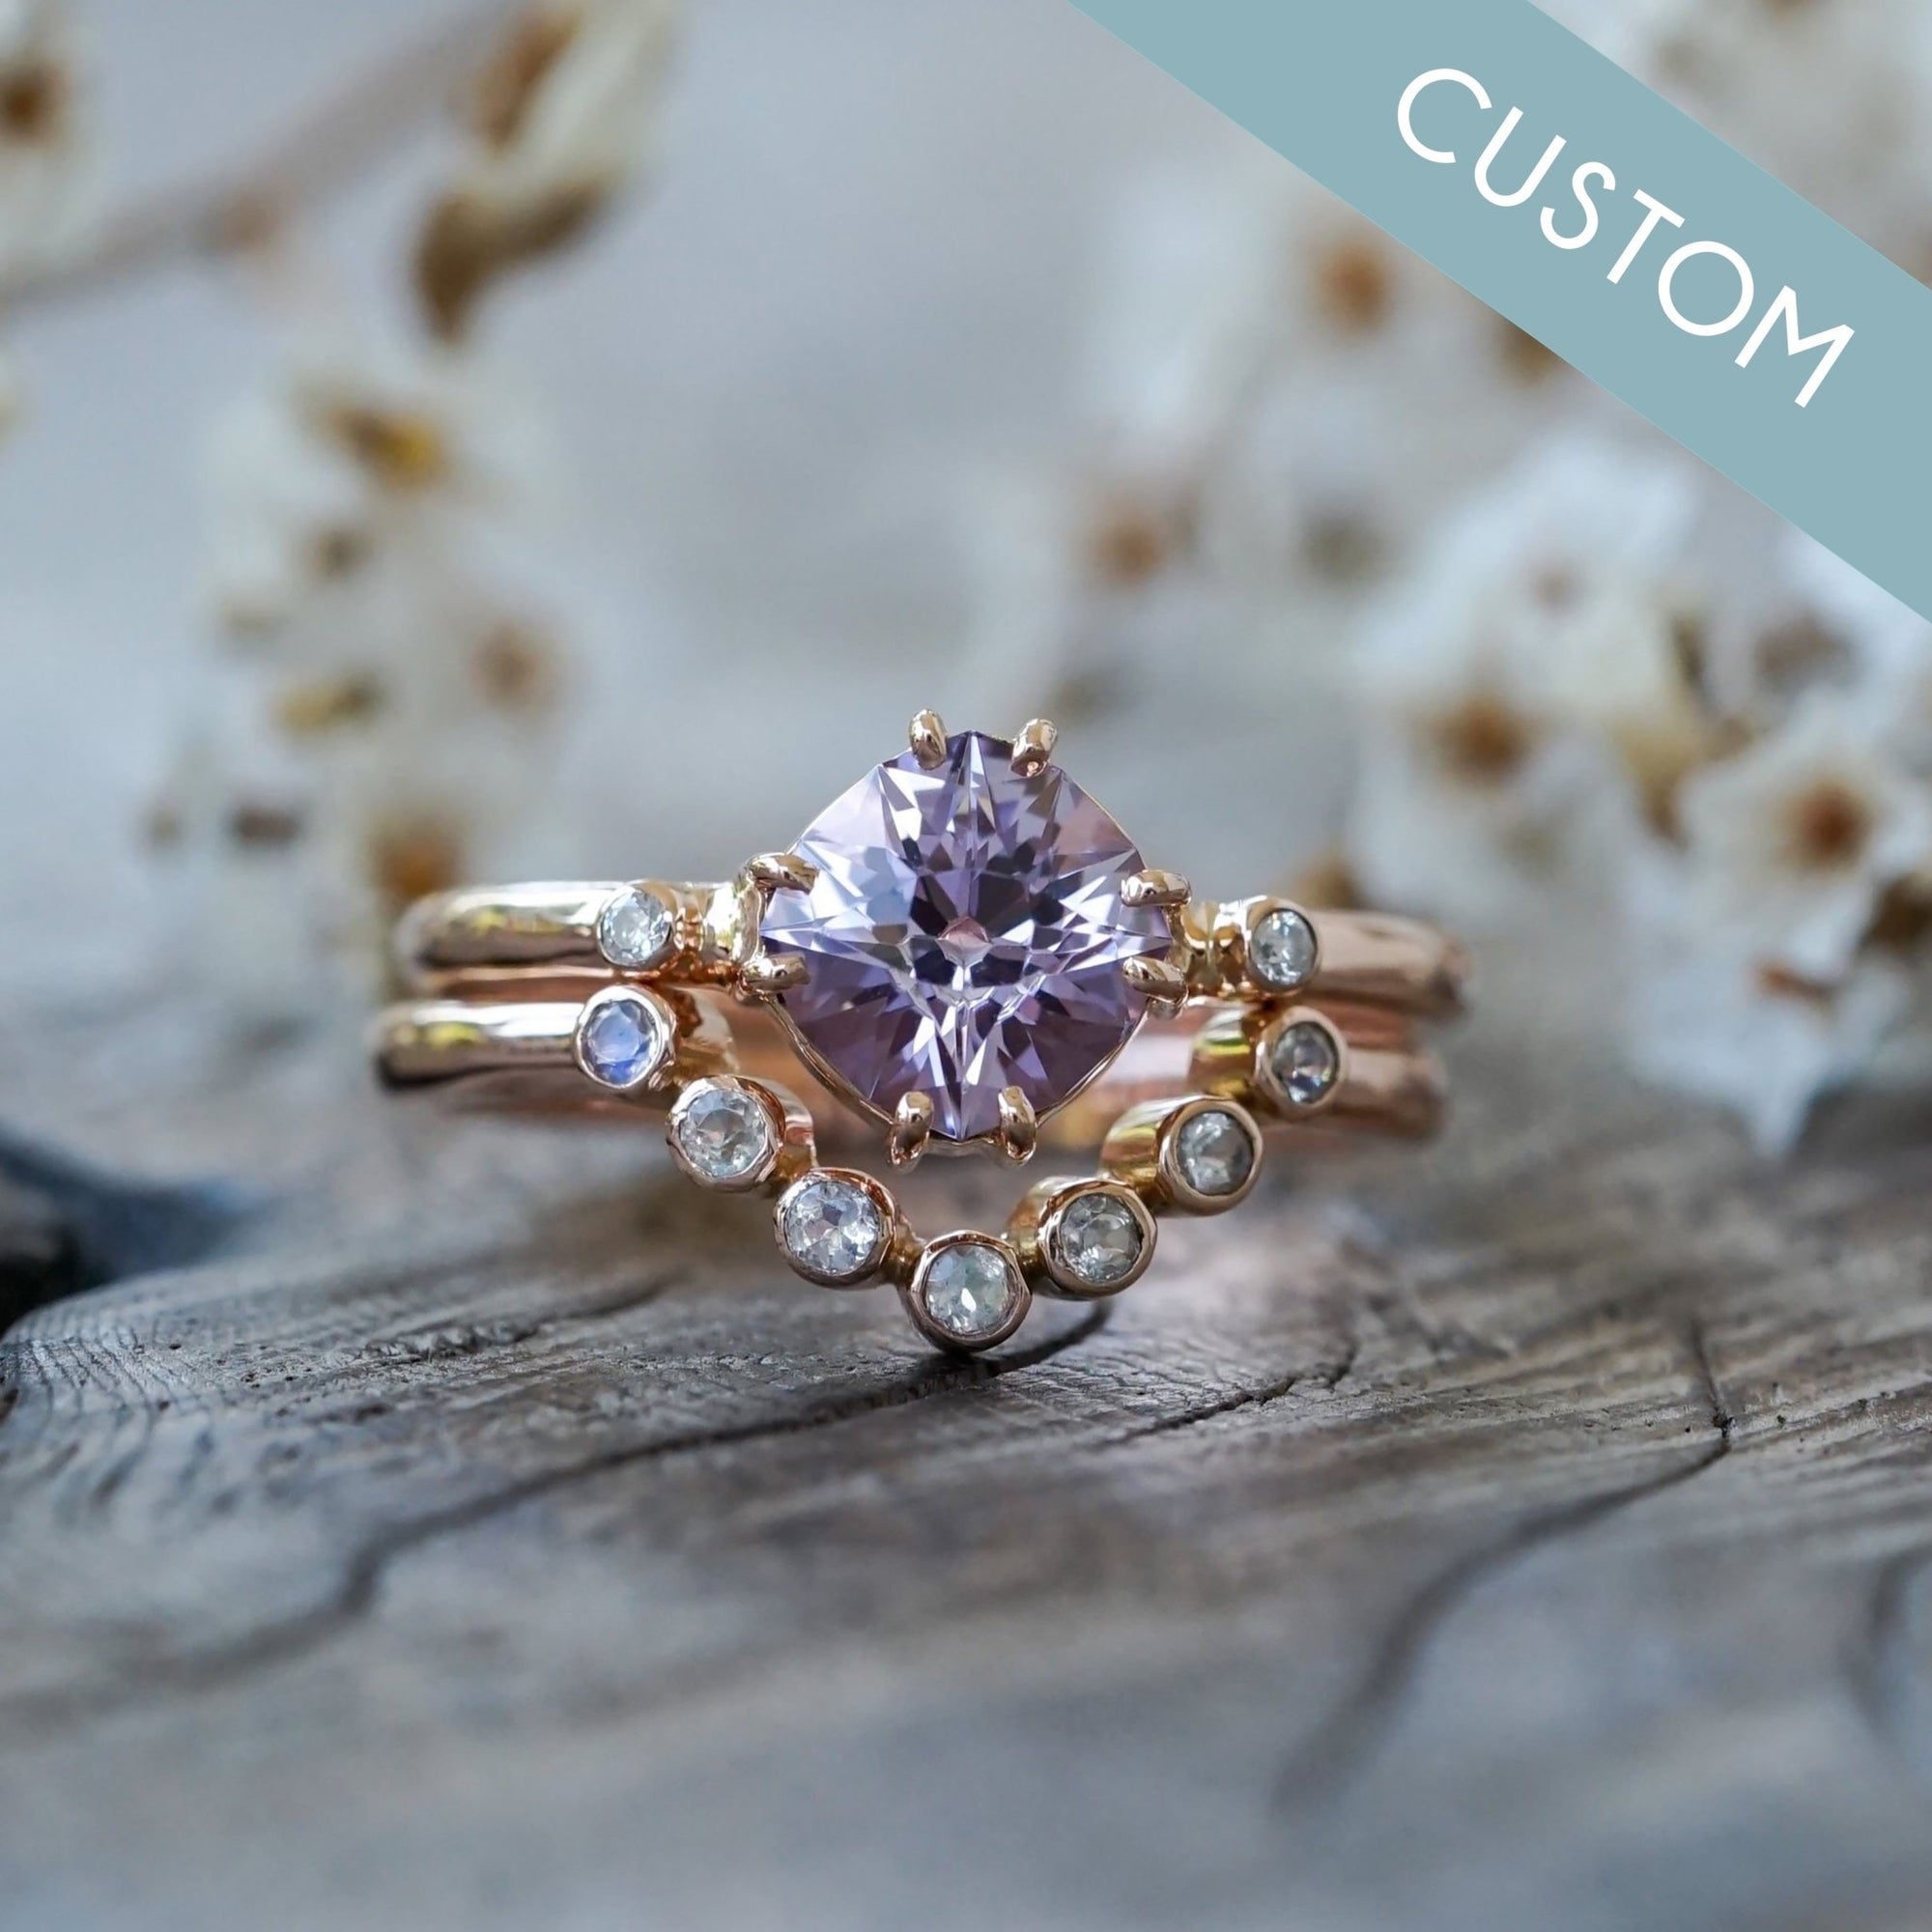 Custom Amethyst Ring - Gardens of the Sun | Ethical Jewelry